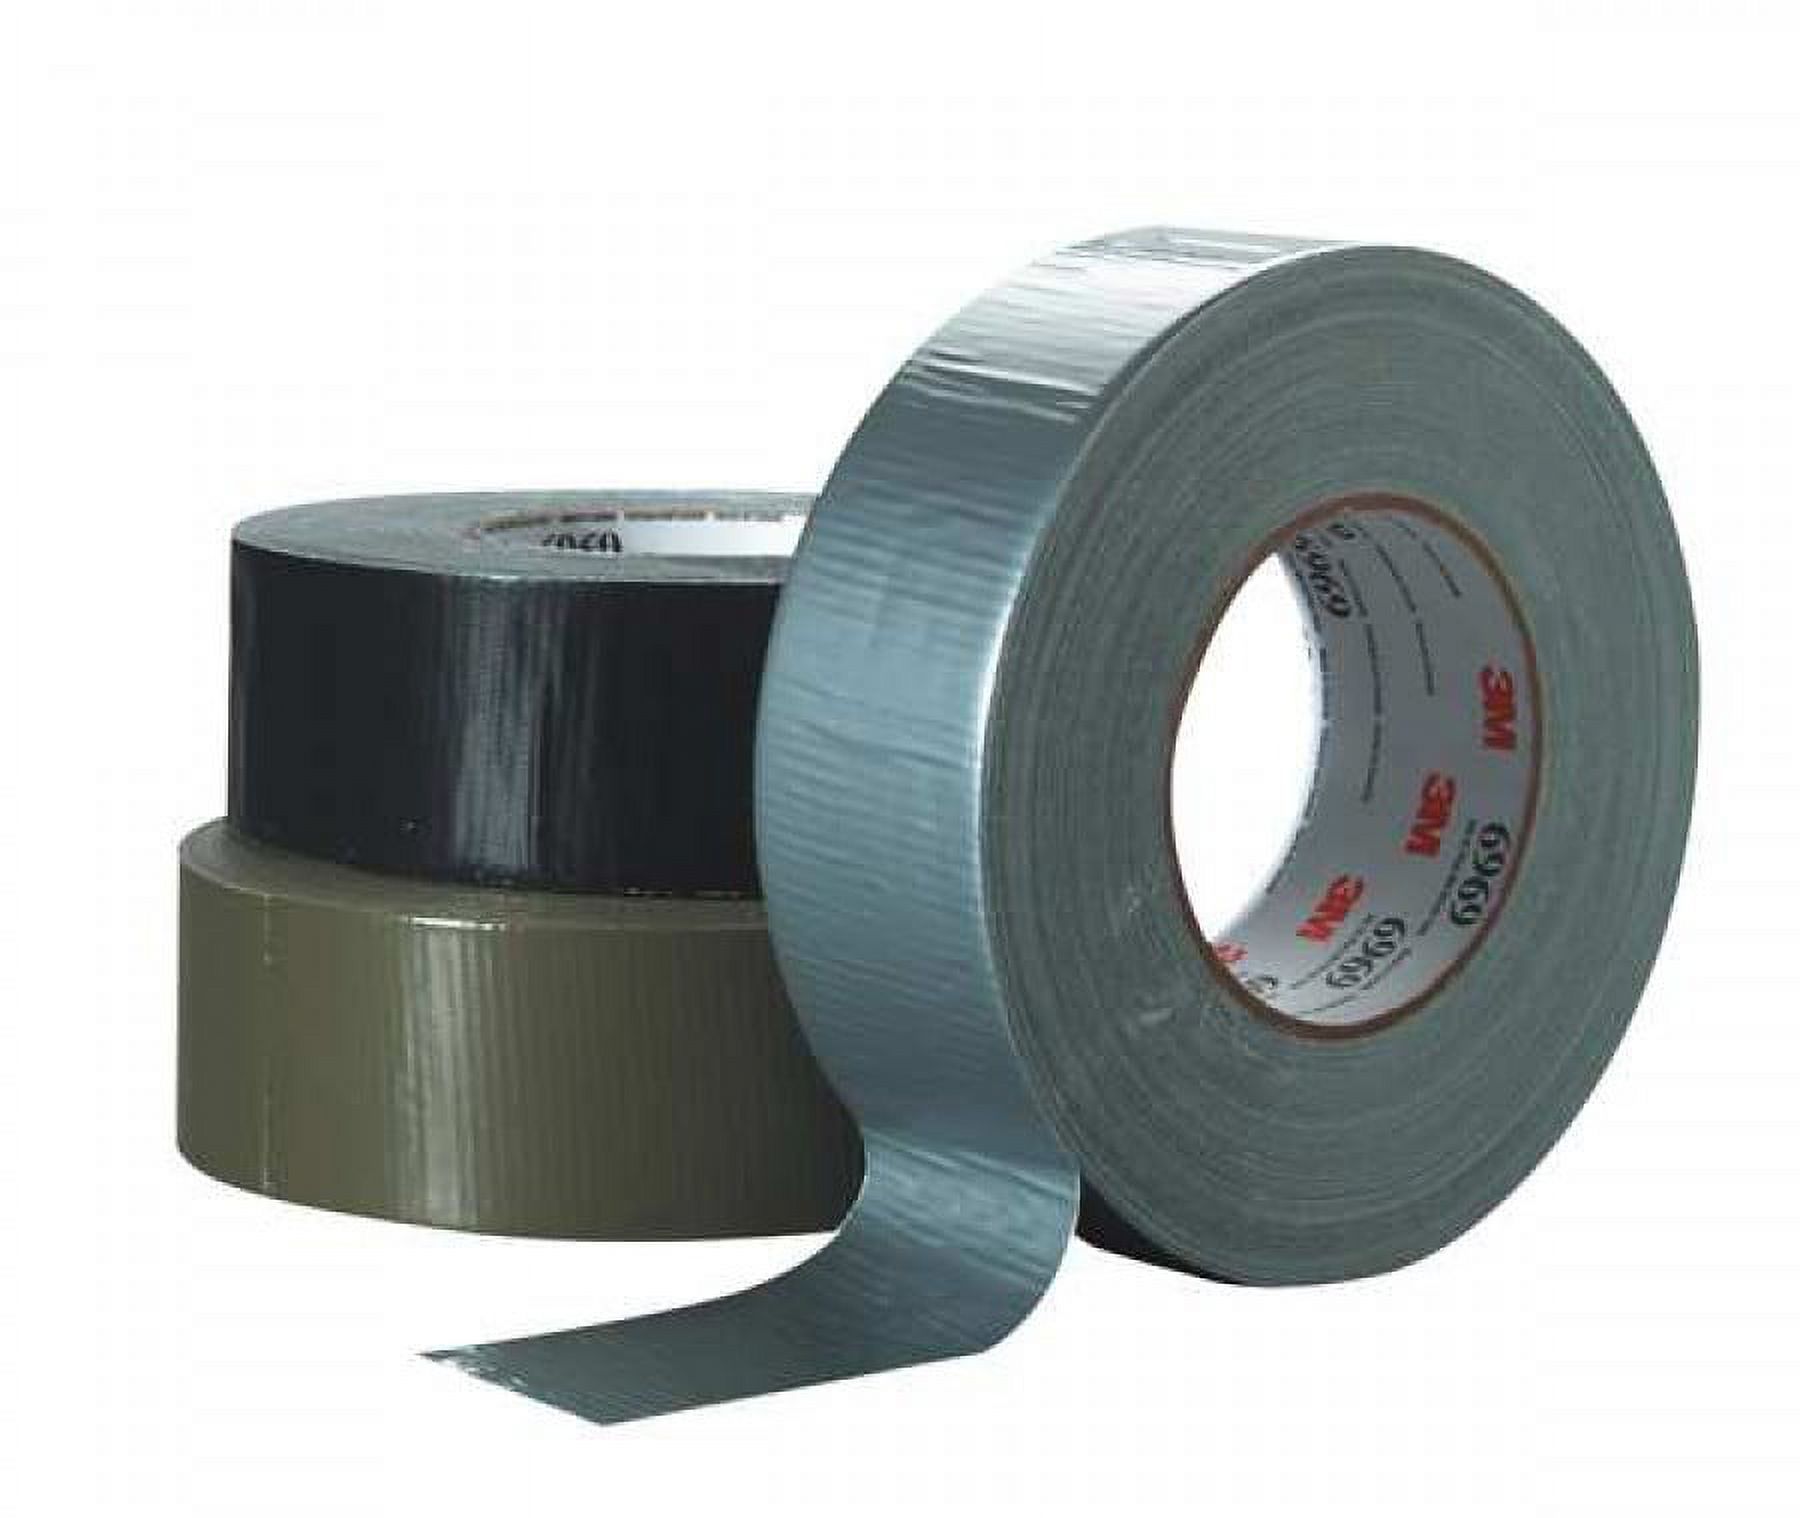 3M 1028560 Extra Heavy-Duty 6969 Duct Tape, Black - 1.88 in. x 60 Yards 